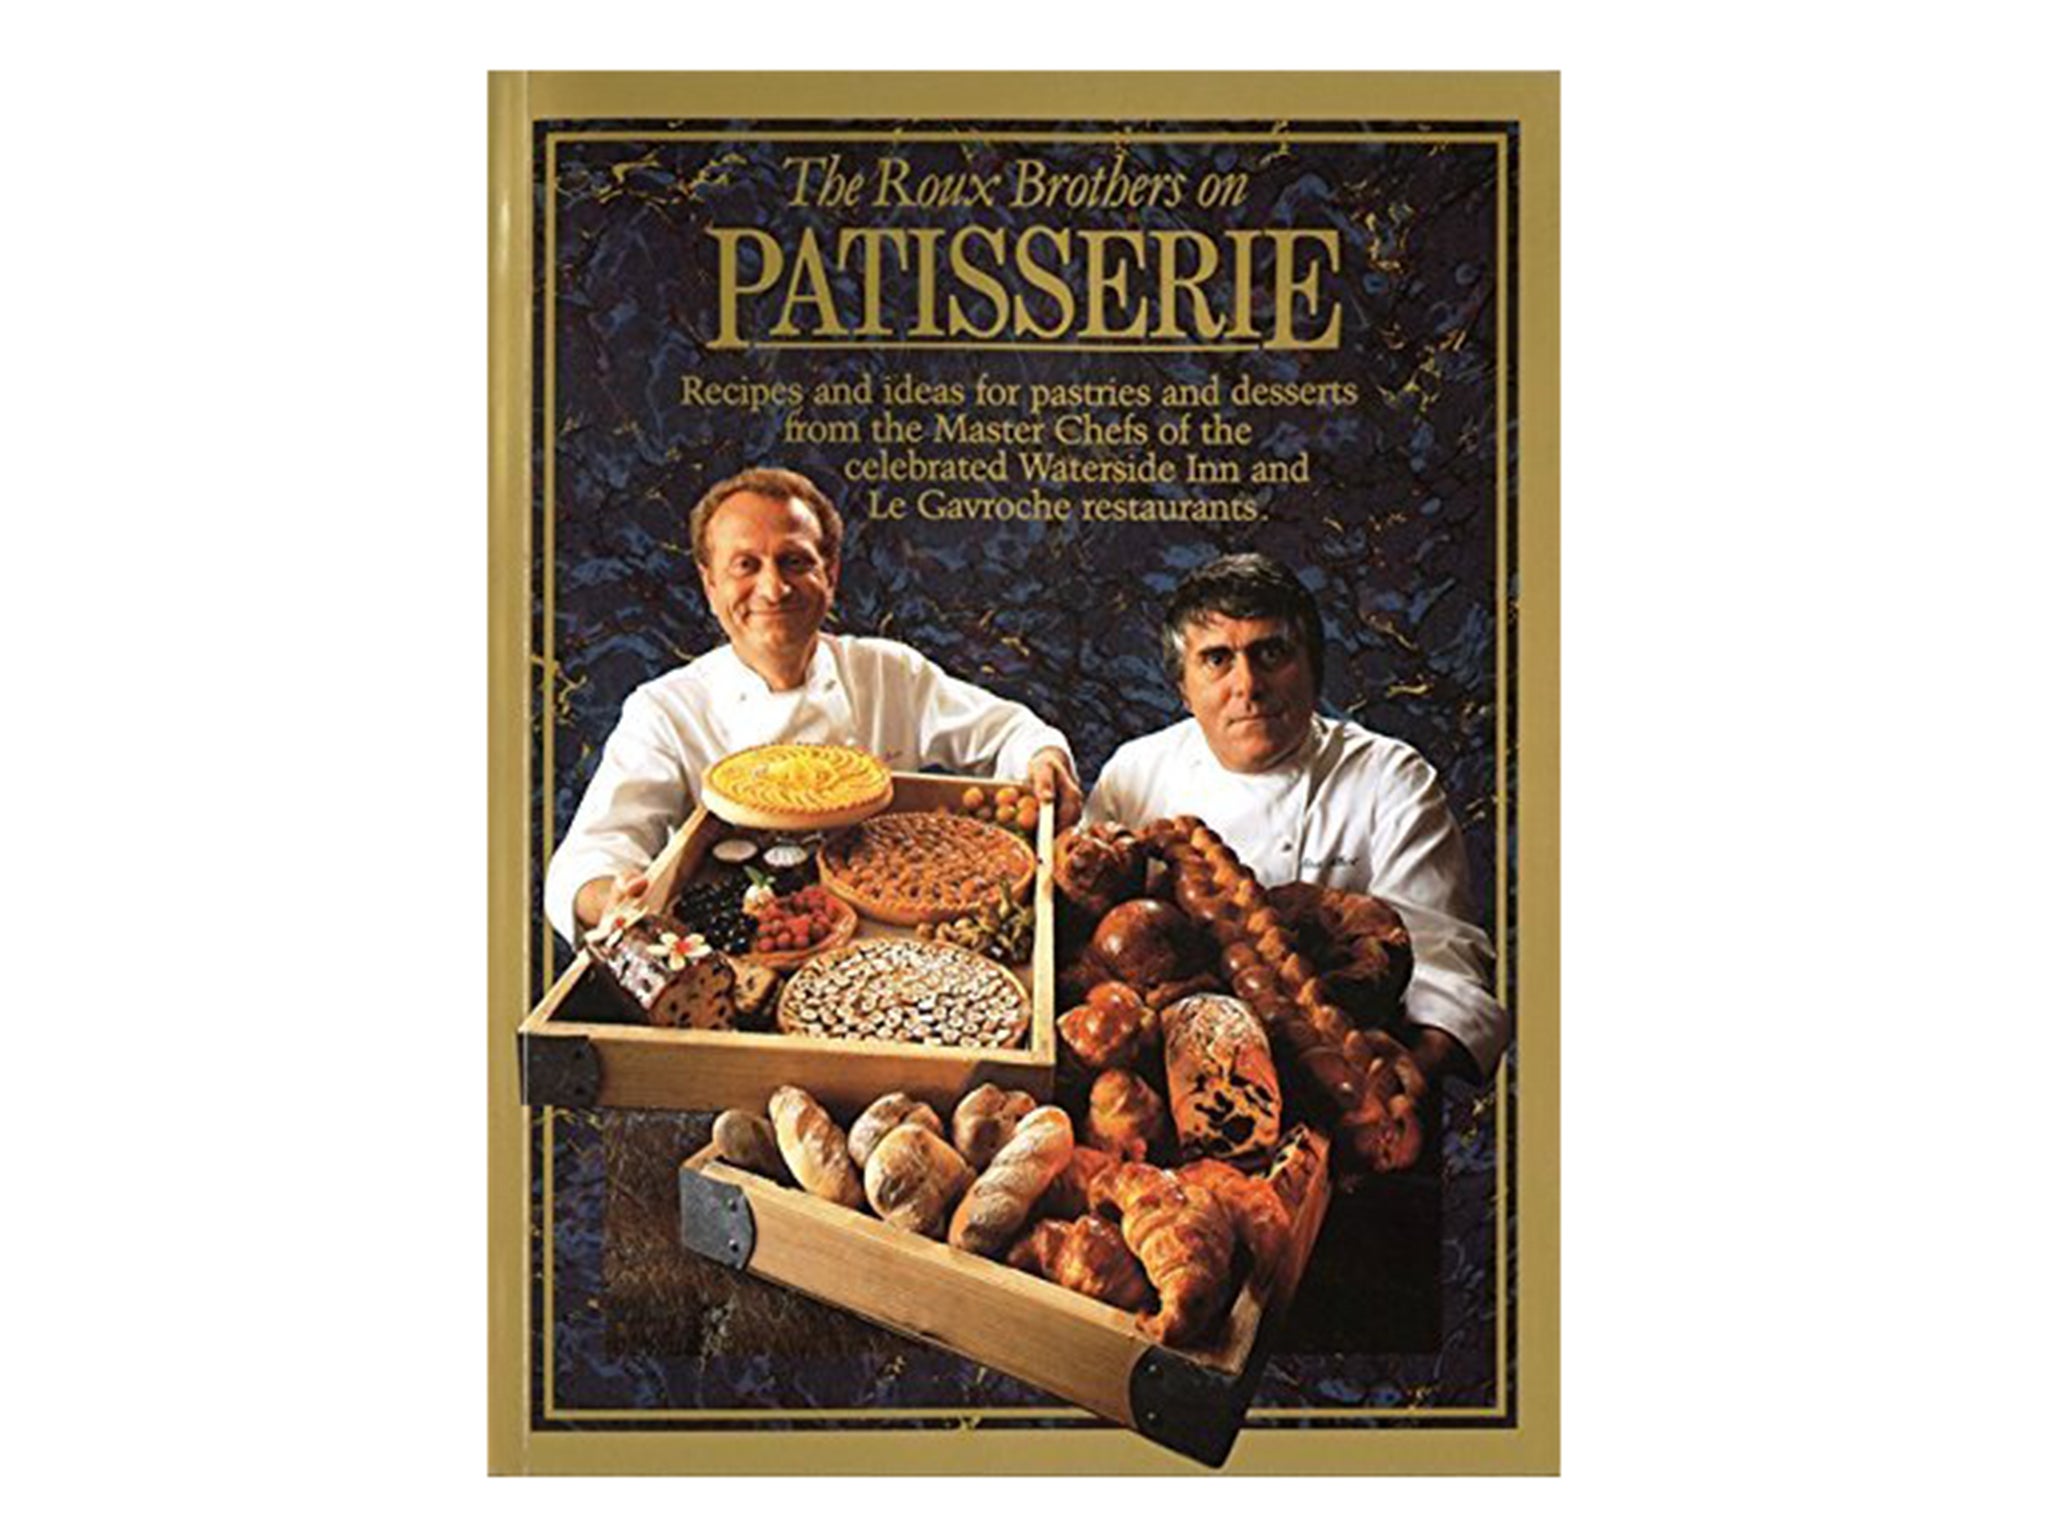 roux-brothers-on-patisserie-indybest.jpg